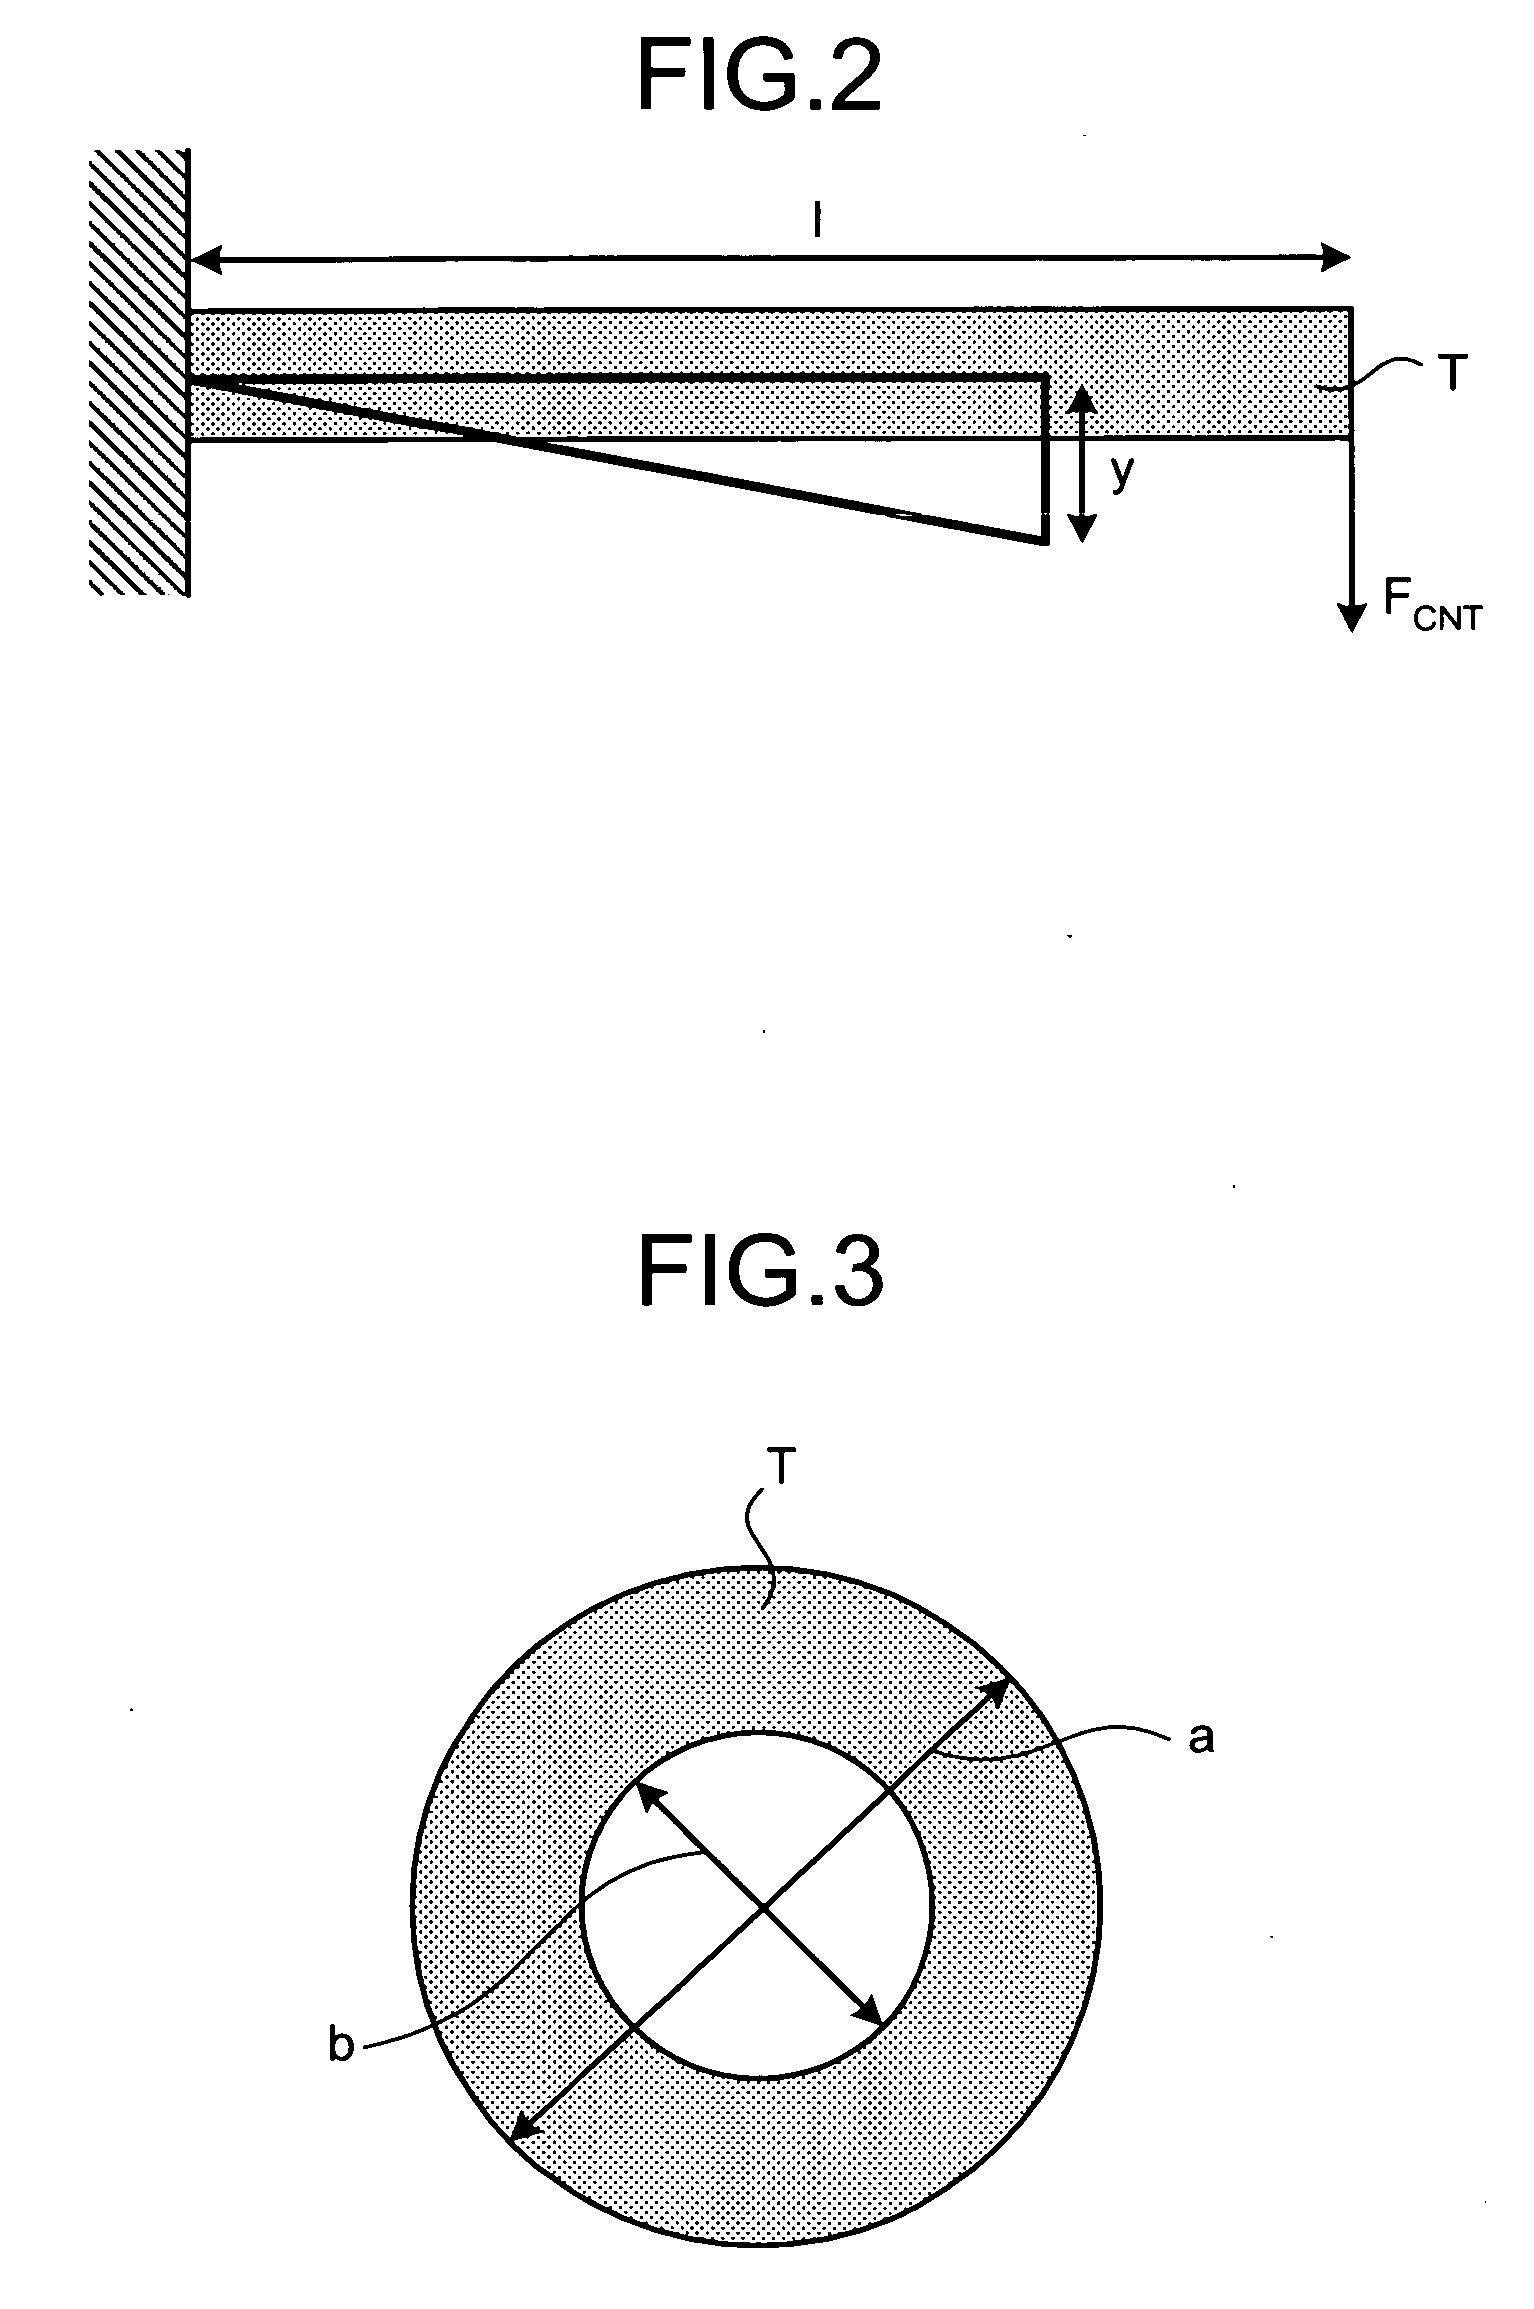 Switch element, memory element and magnetoresistive effect element